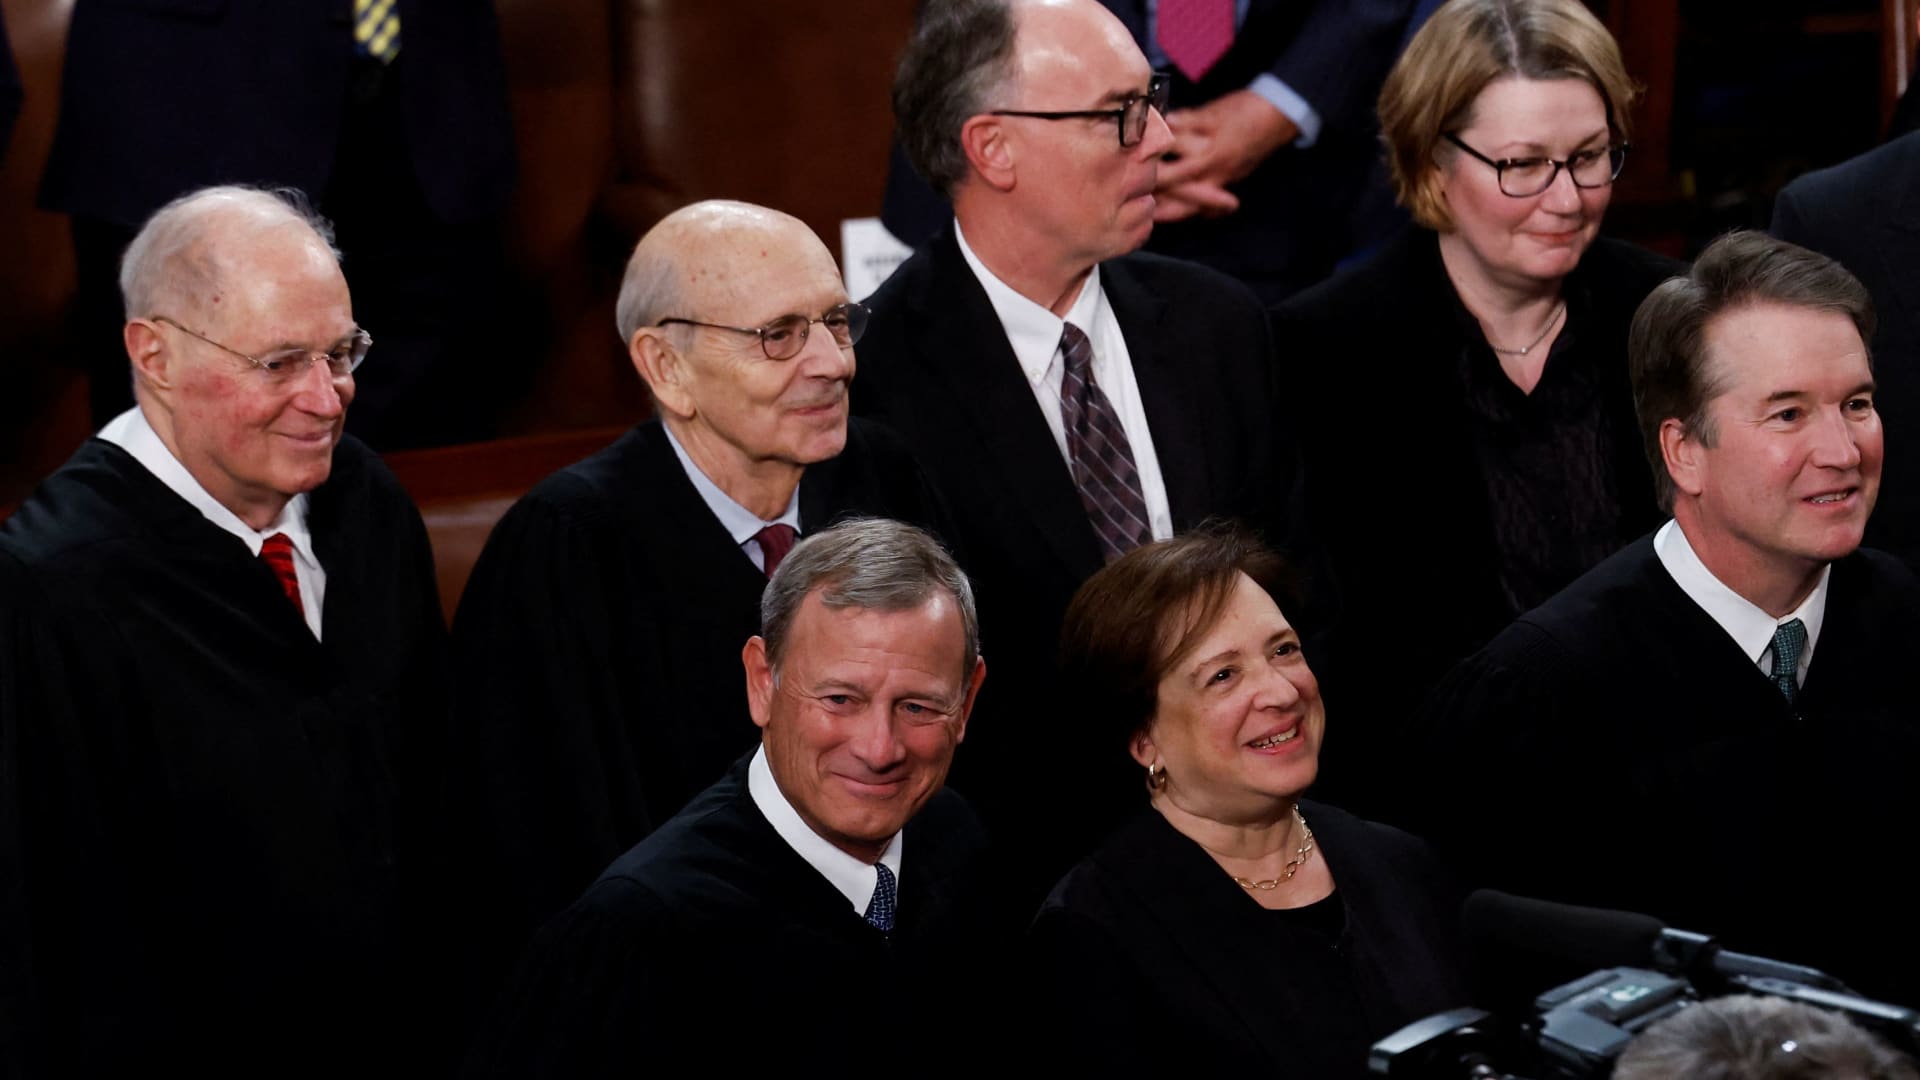 U.S. Supreme Court Justices arrive in the House Chamber prior to U.S. President Joe Biden delivering his State of the Union address at the U.S. Capitol in Washington, U.S., February 7, 2023. 